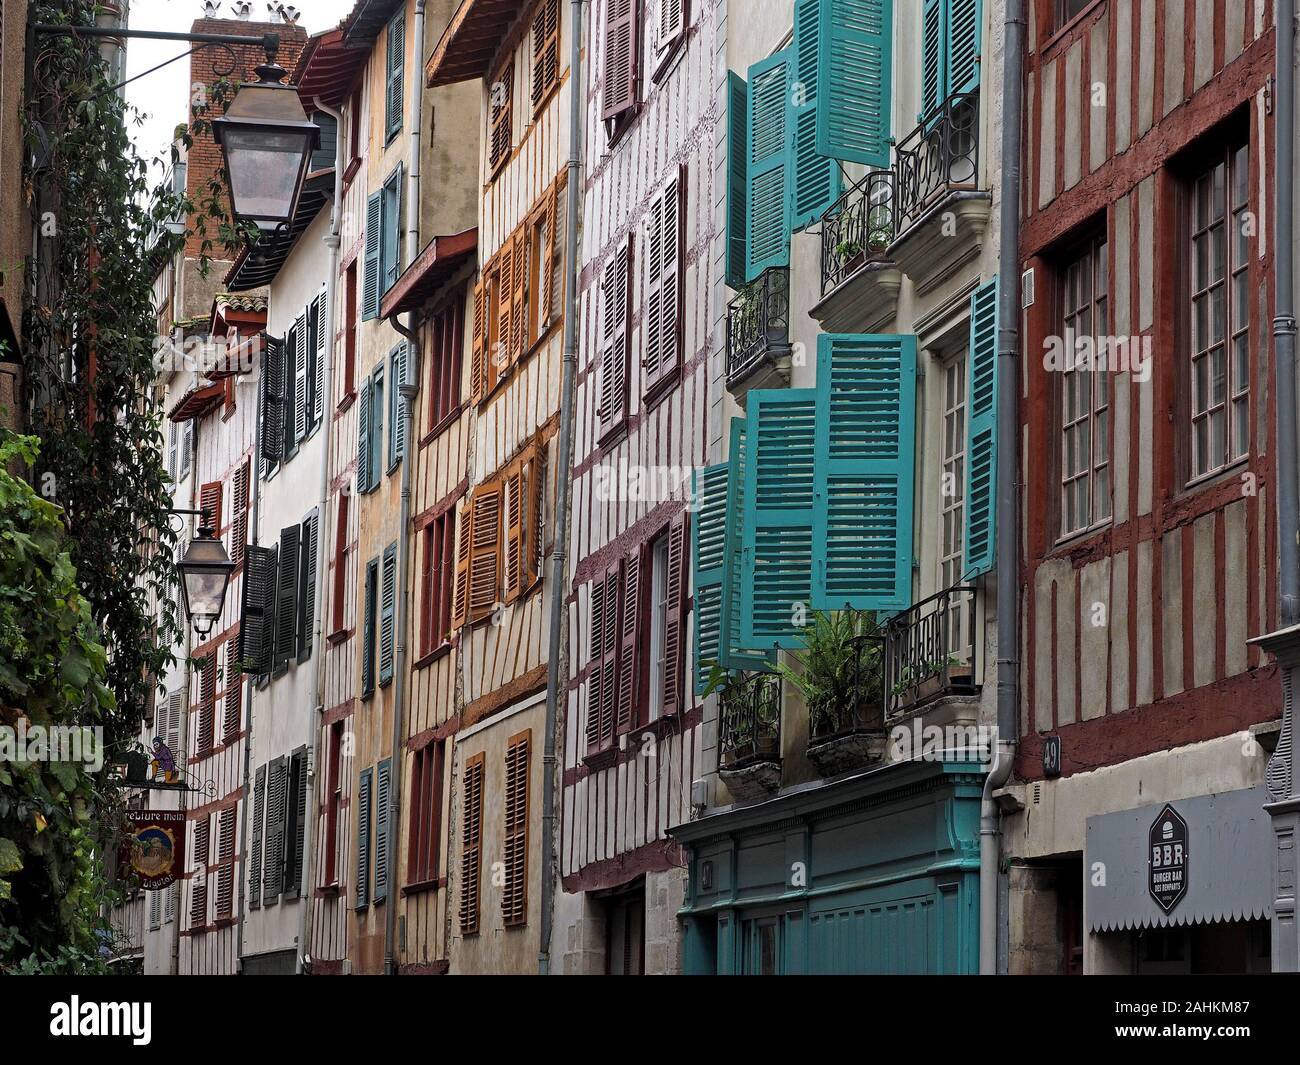 vernacular buildings in the streets of the city of Bayonne, with typical wooden shuttered windows, timbered facades and bronze lanterns  France,Europe Stock Photo